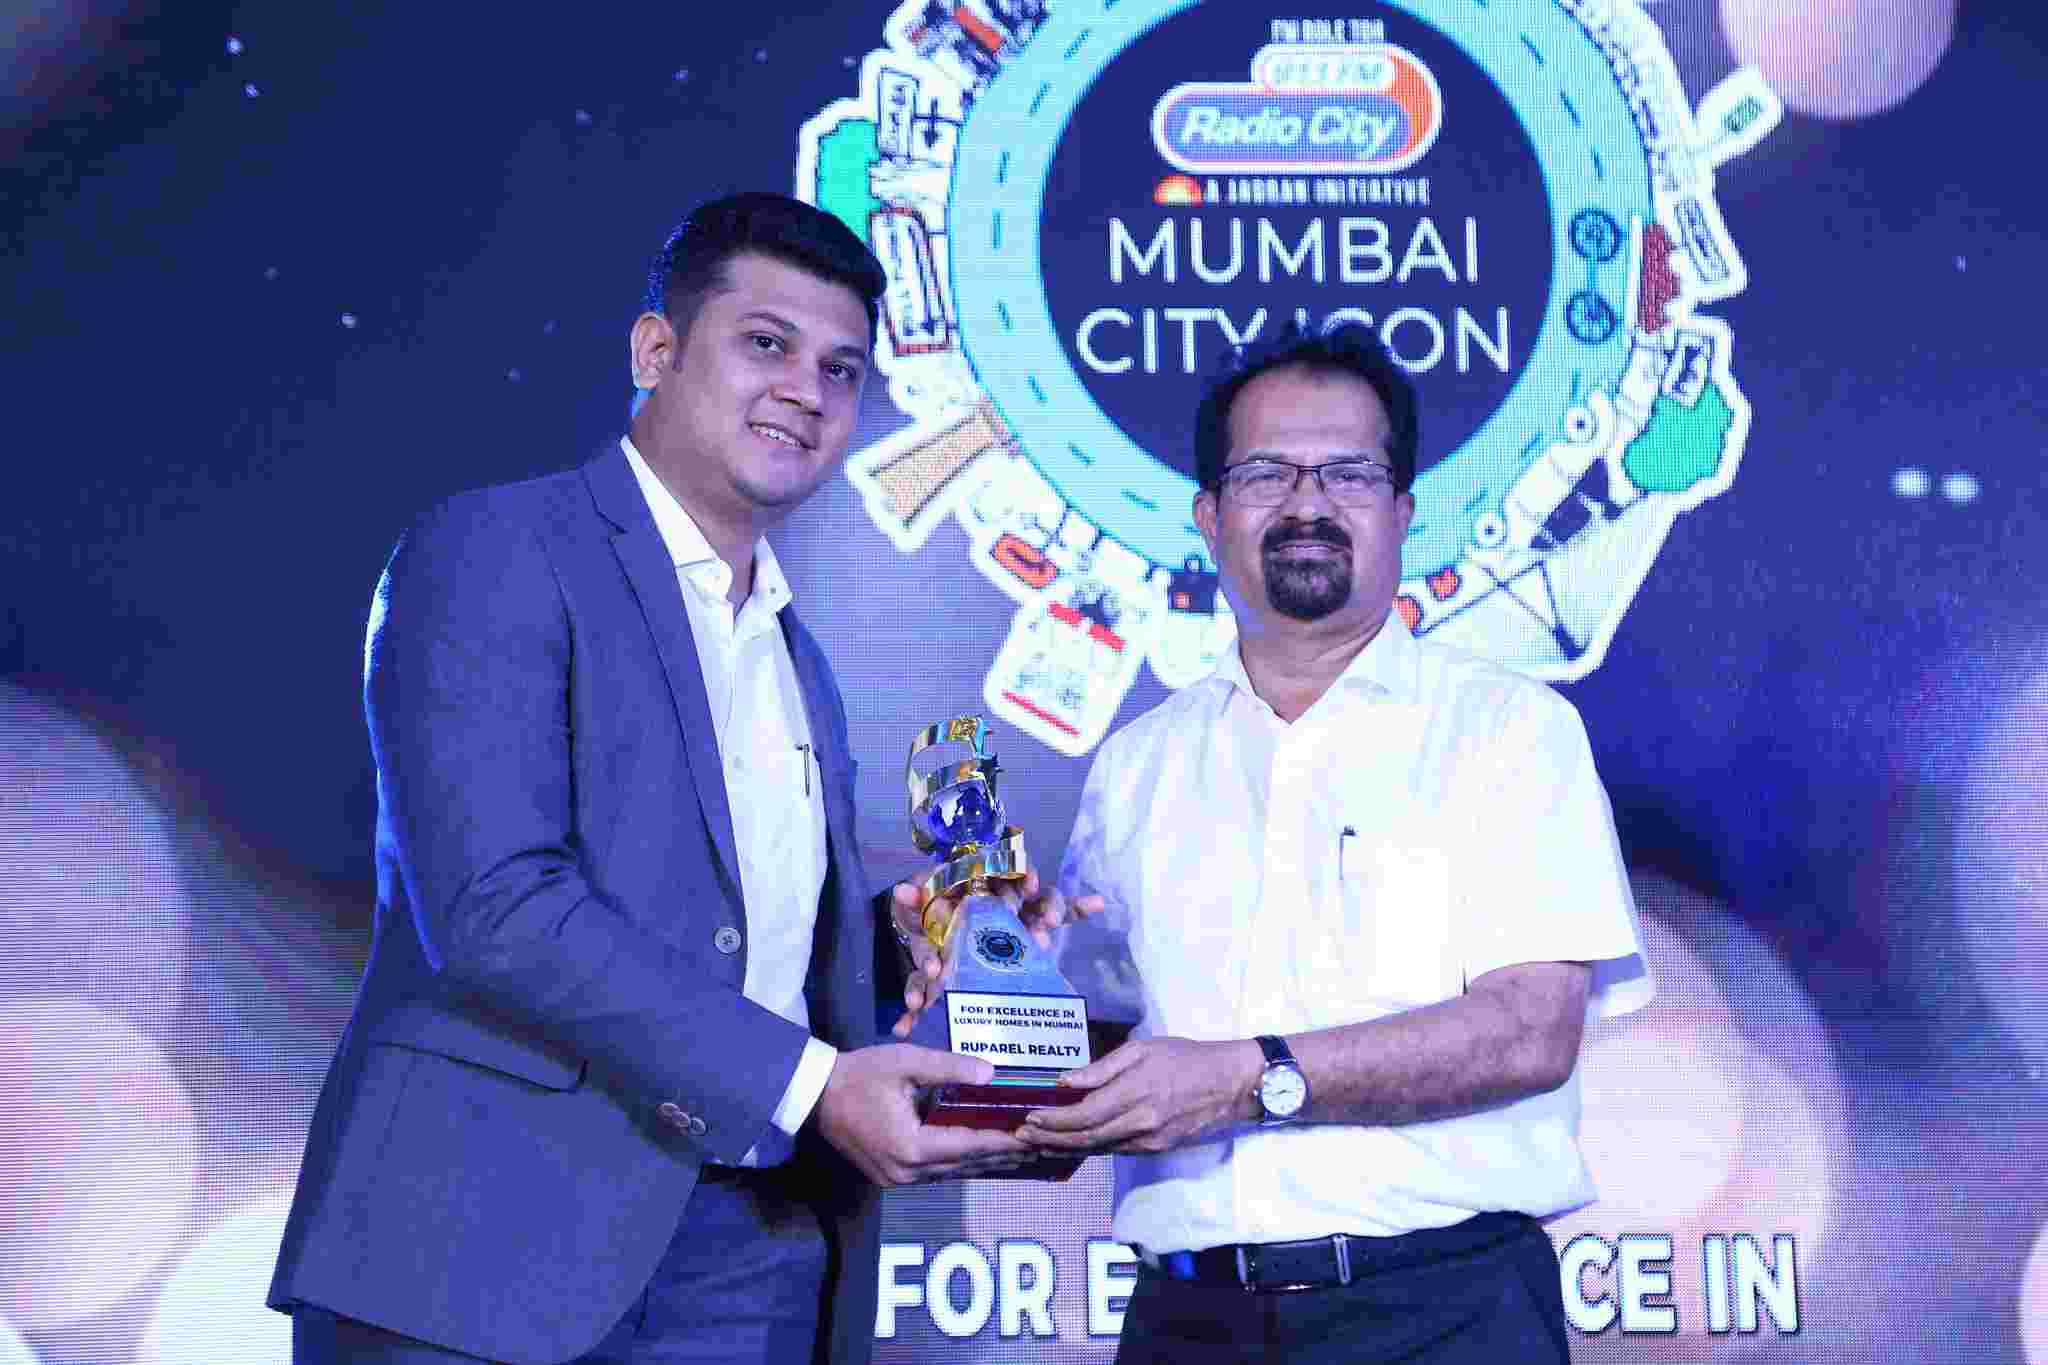 Ruparel realty awarded Mumbai City Icon for Excellence of Luxury Homes 2018